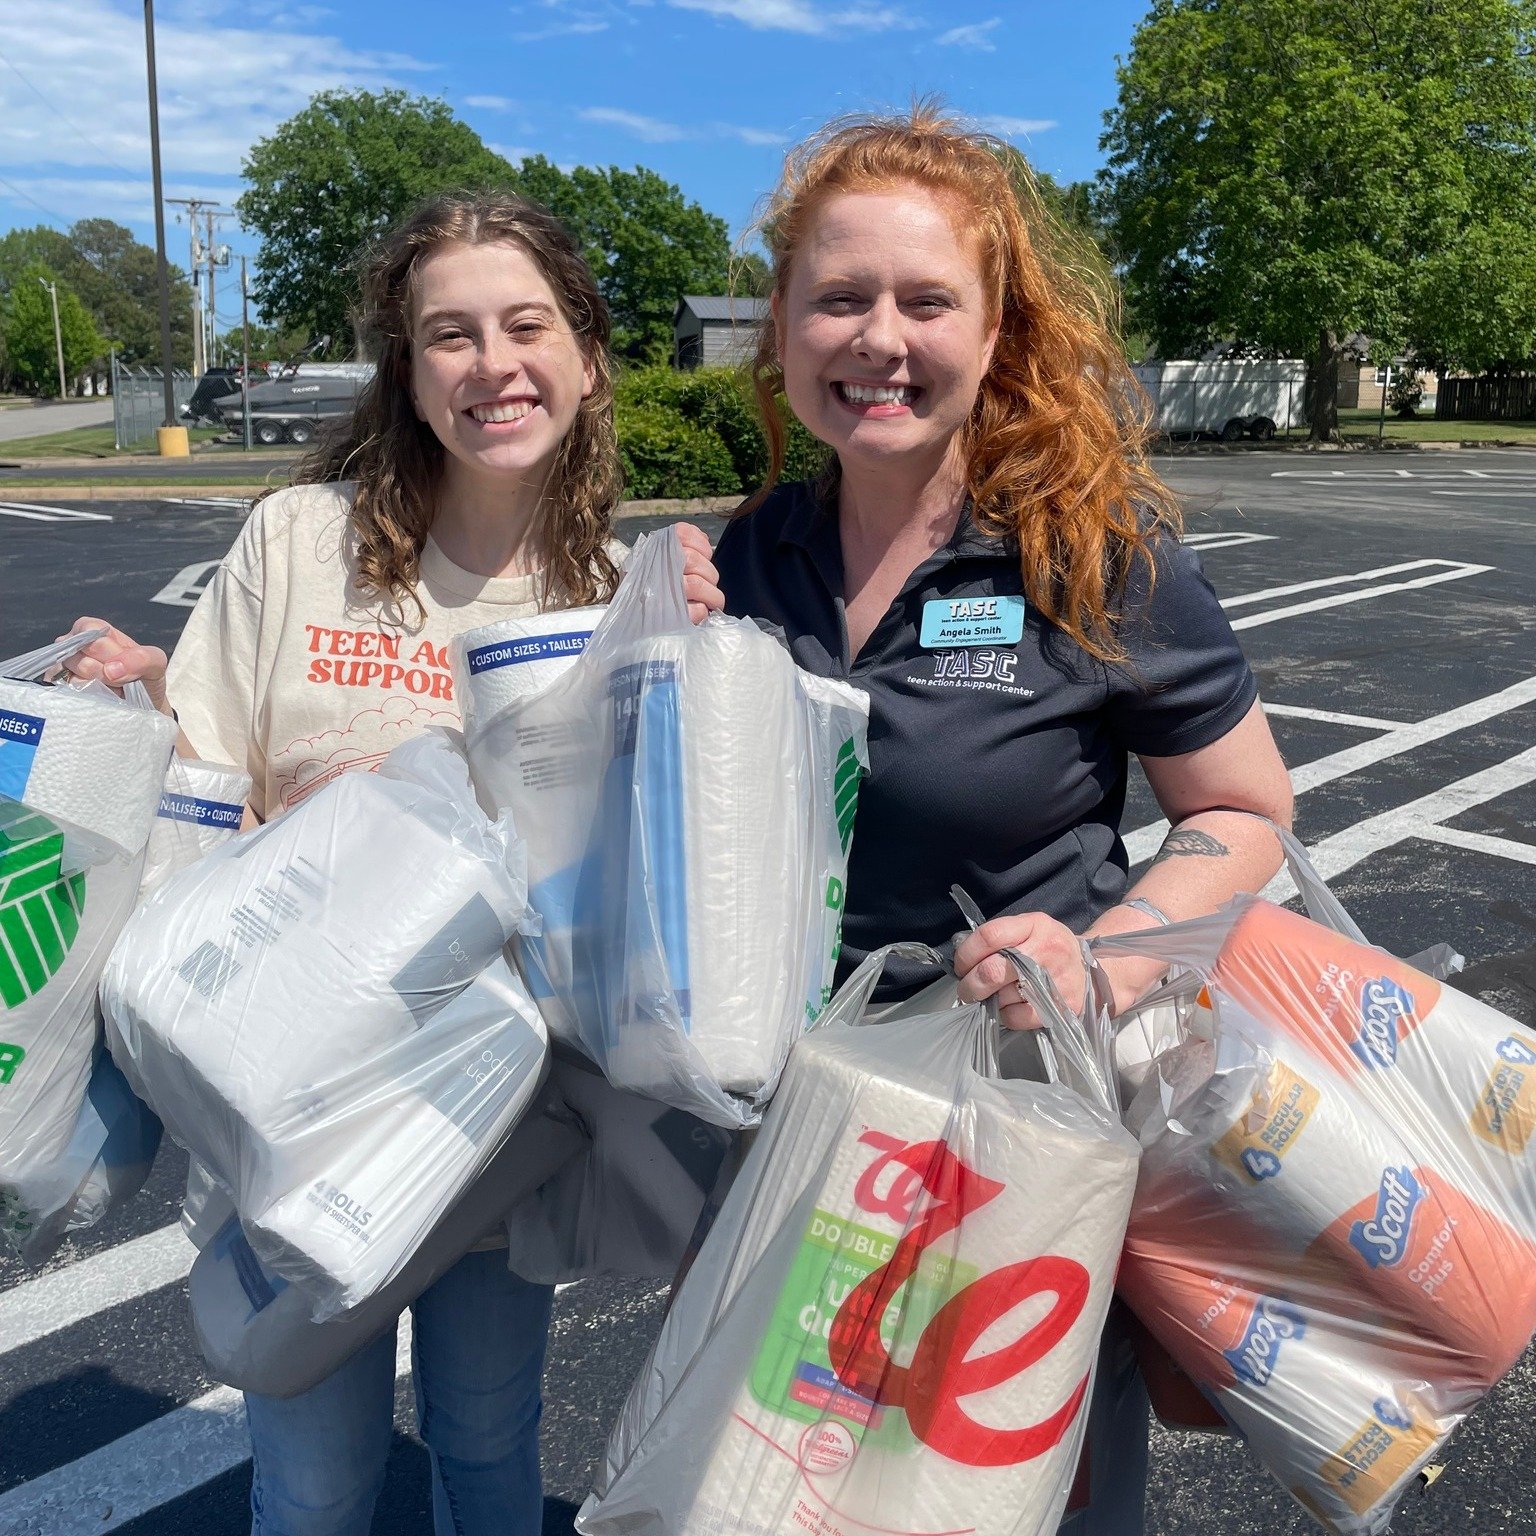 At Saving Grace, we believe that we are all in this TOGETHER! Part of our culture here is taking what we need for &quot;Grace&quot; and giving away the rest. 

This week we were able to drop off needed items to Teen Action &amp; Support Center (TASC)